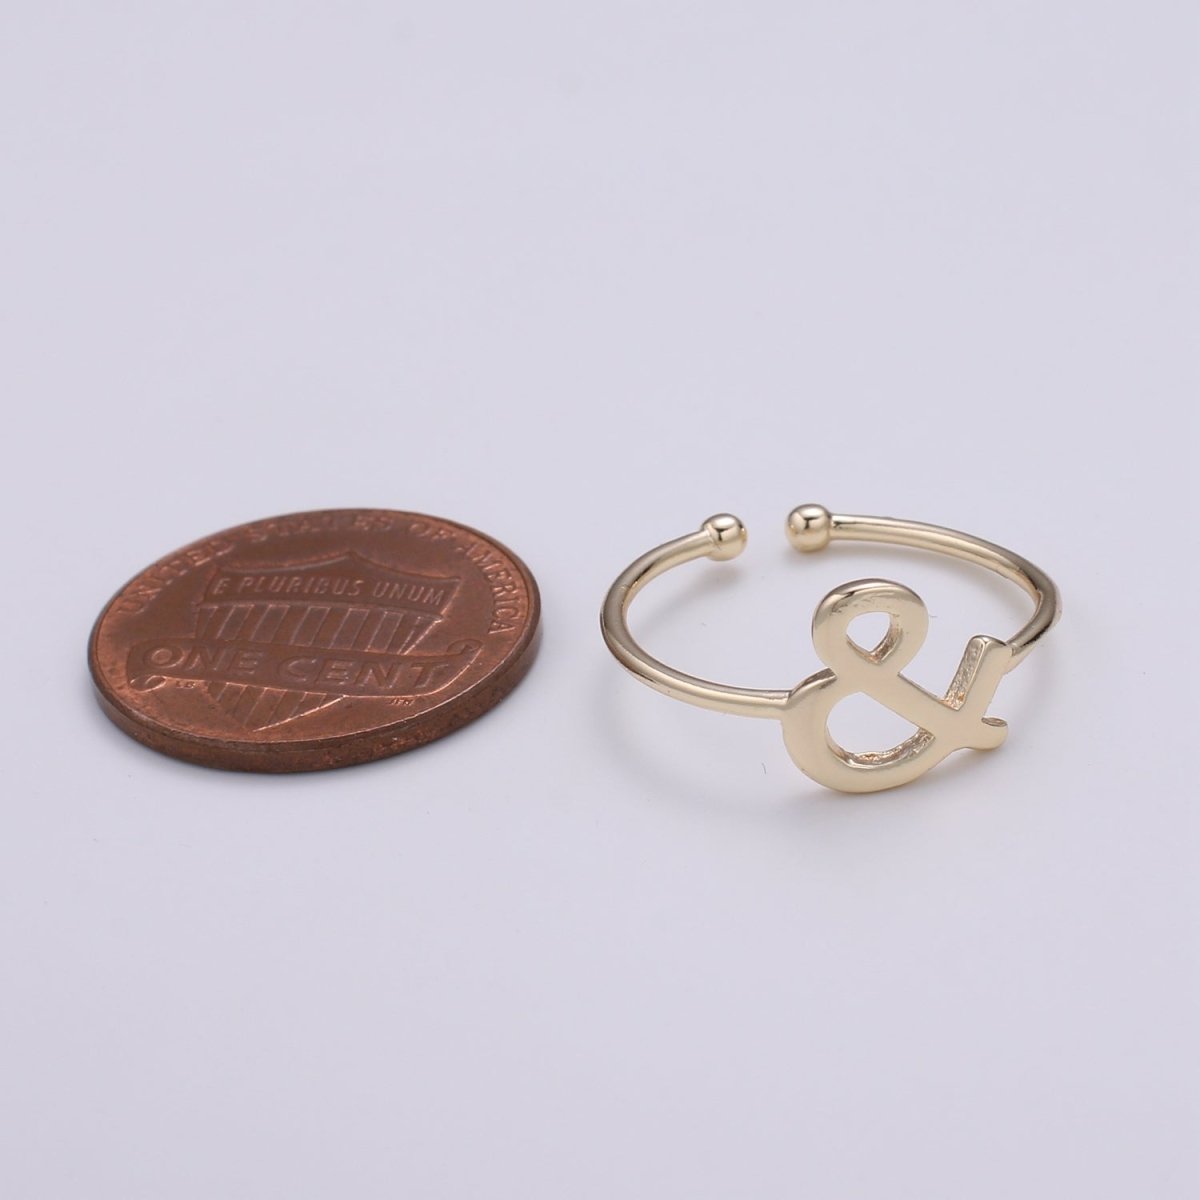 1pc Ampersand 18k Gold Ring, "And" symbol Adjustable Gold Curb Ring, Simple Ring, "Et" Ring- 254 - DLUXCA